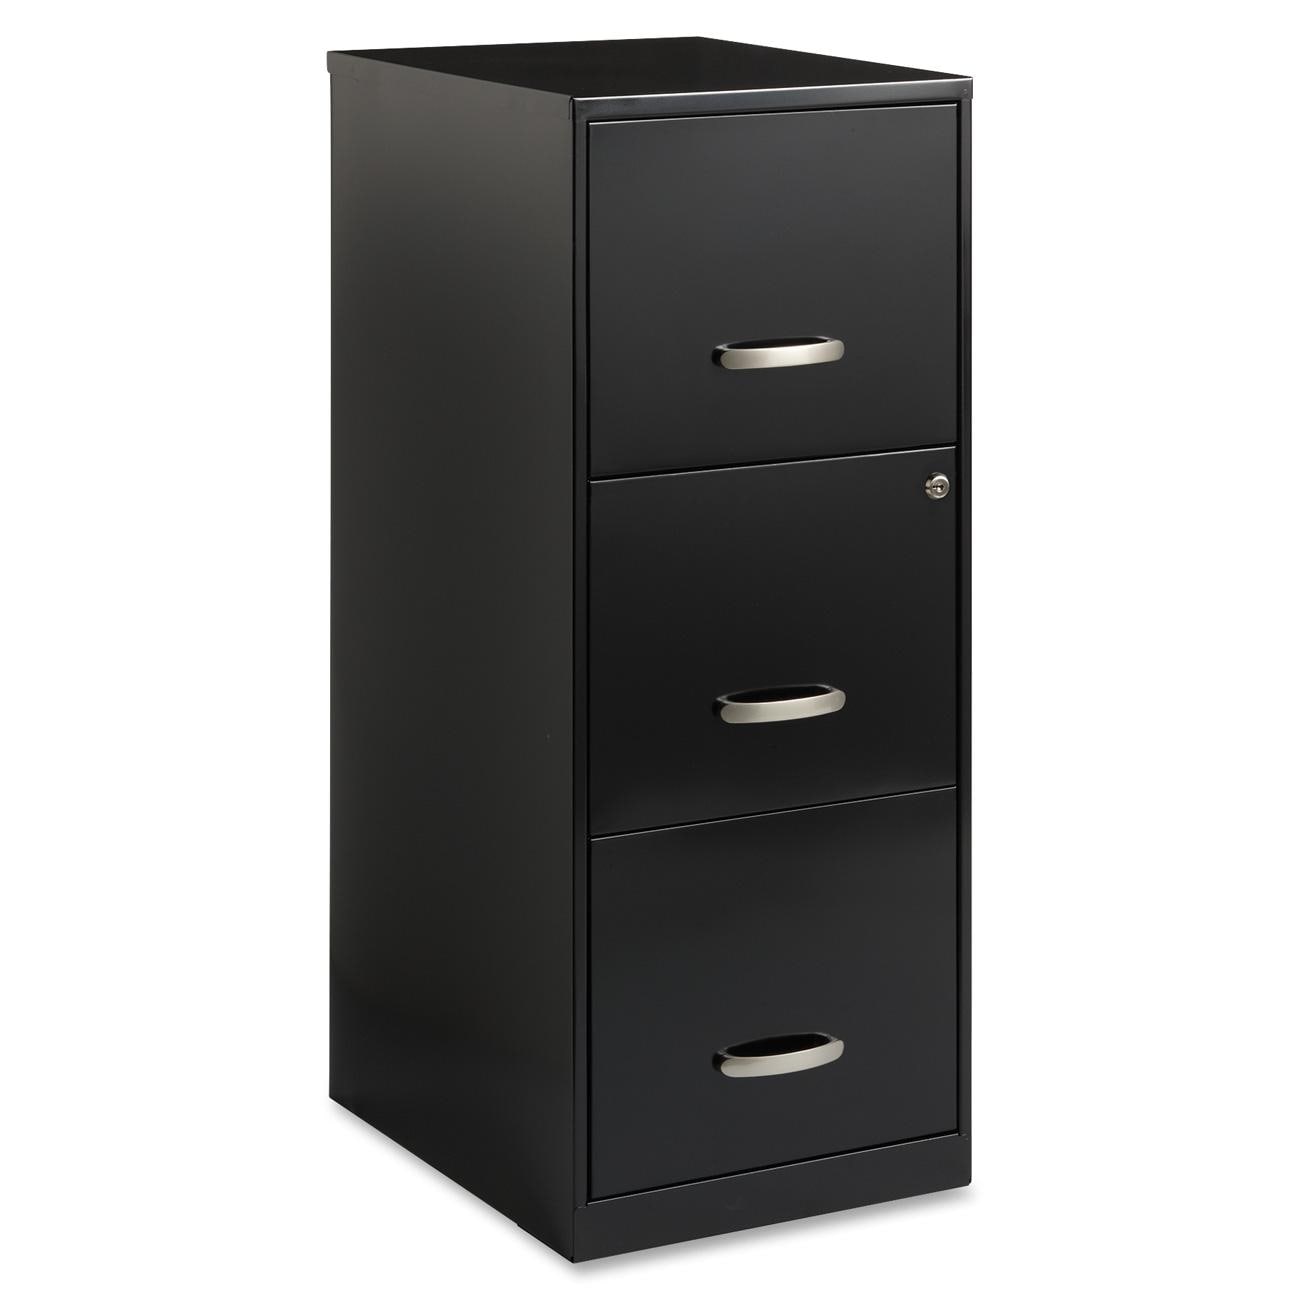 Filing Cabinet 2 Drawer Steel File Cabinet w/ Lock for Home Office Durable Black 